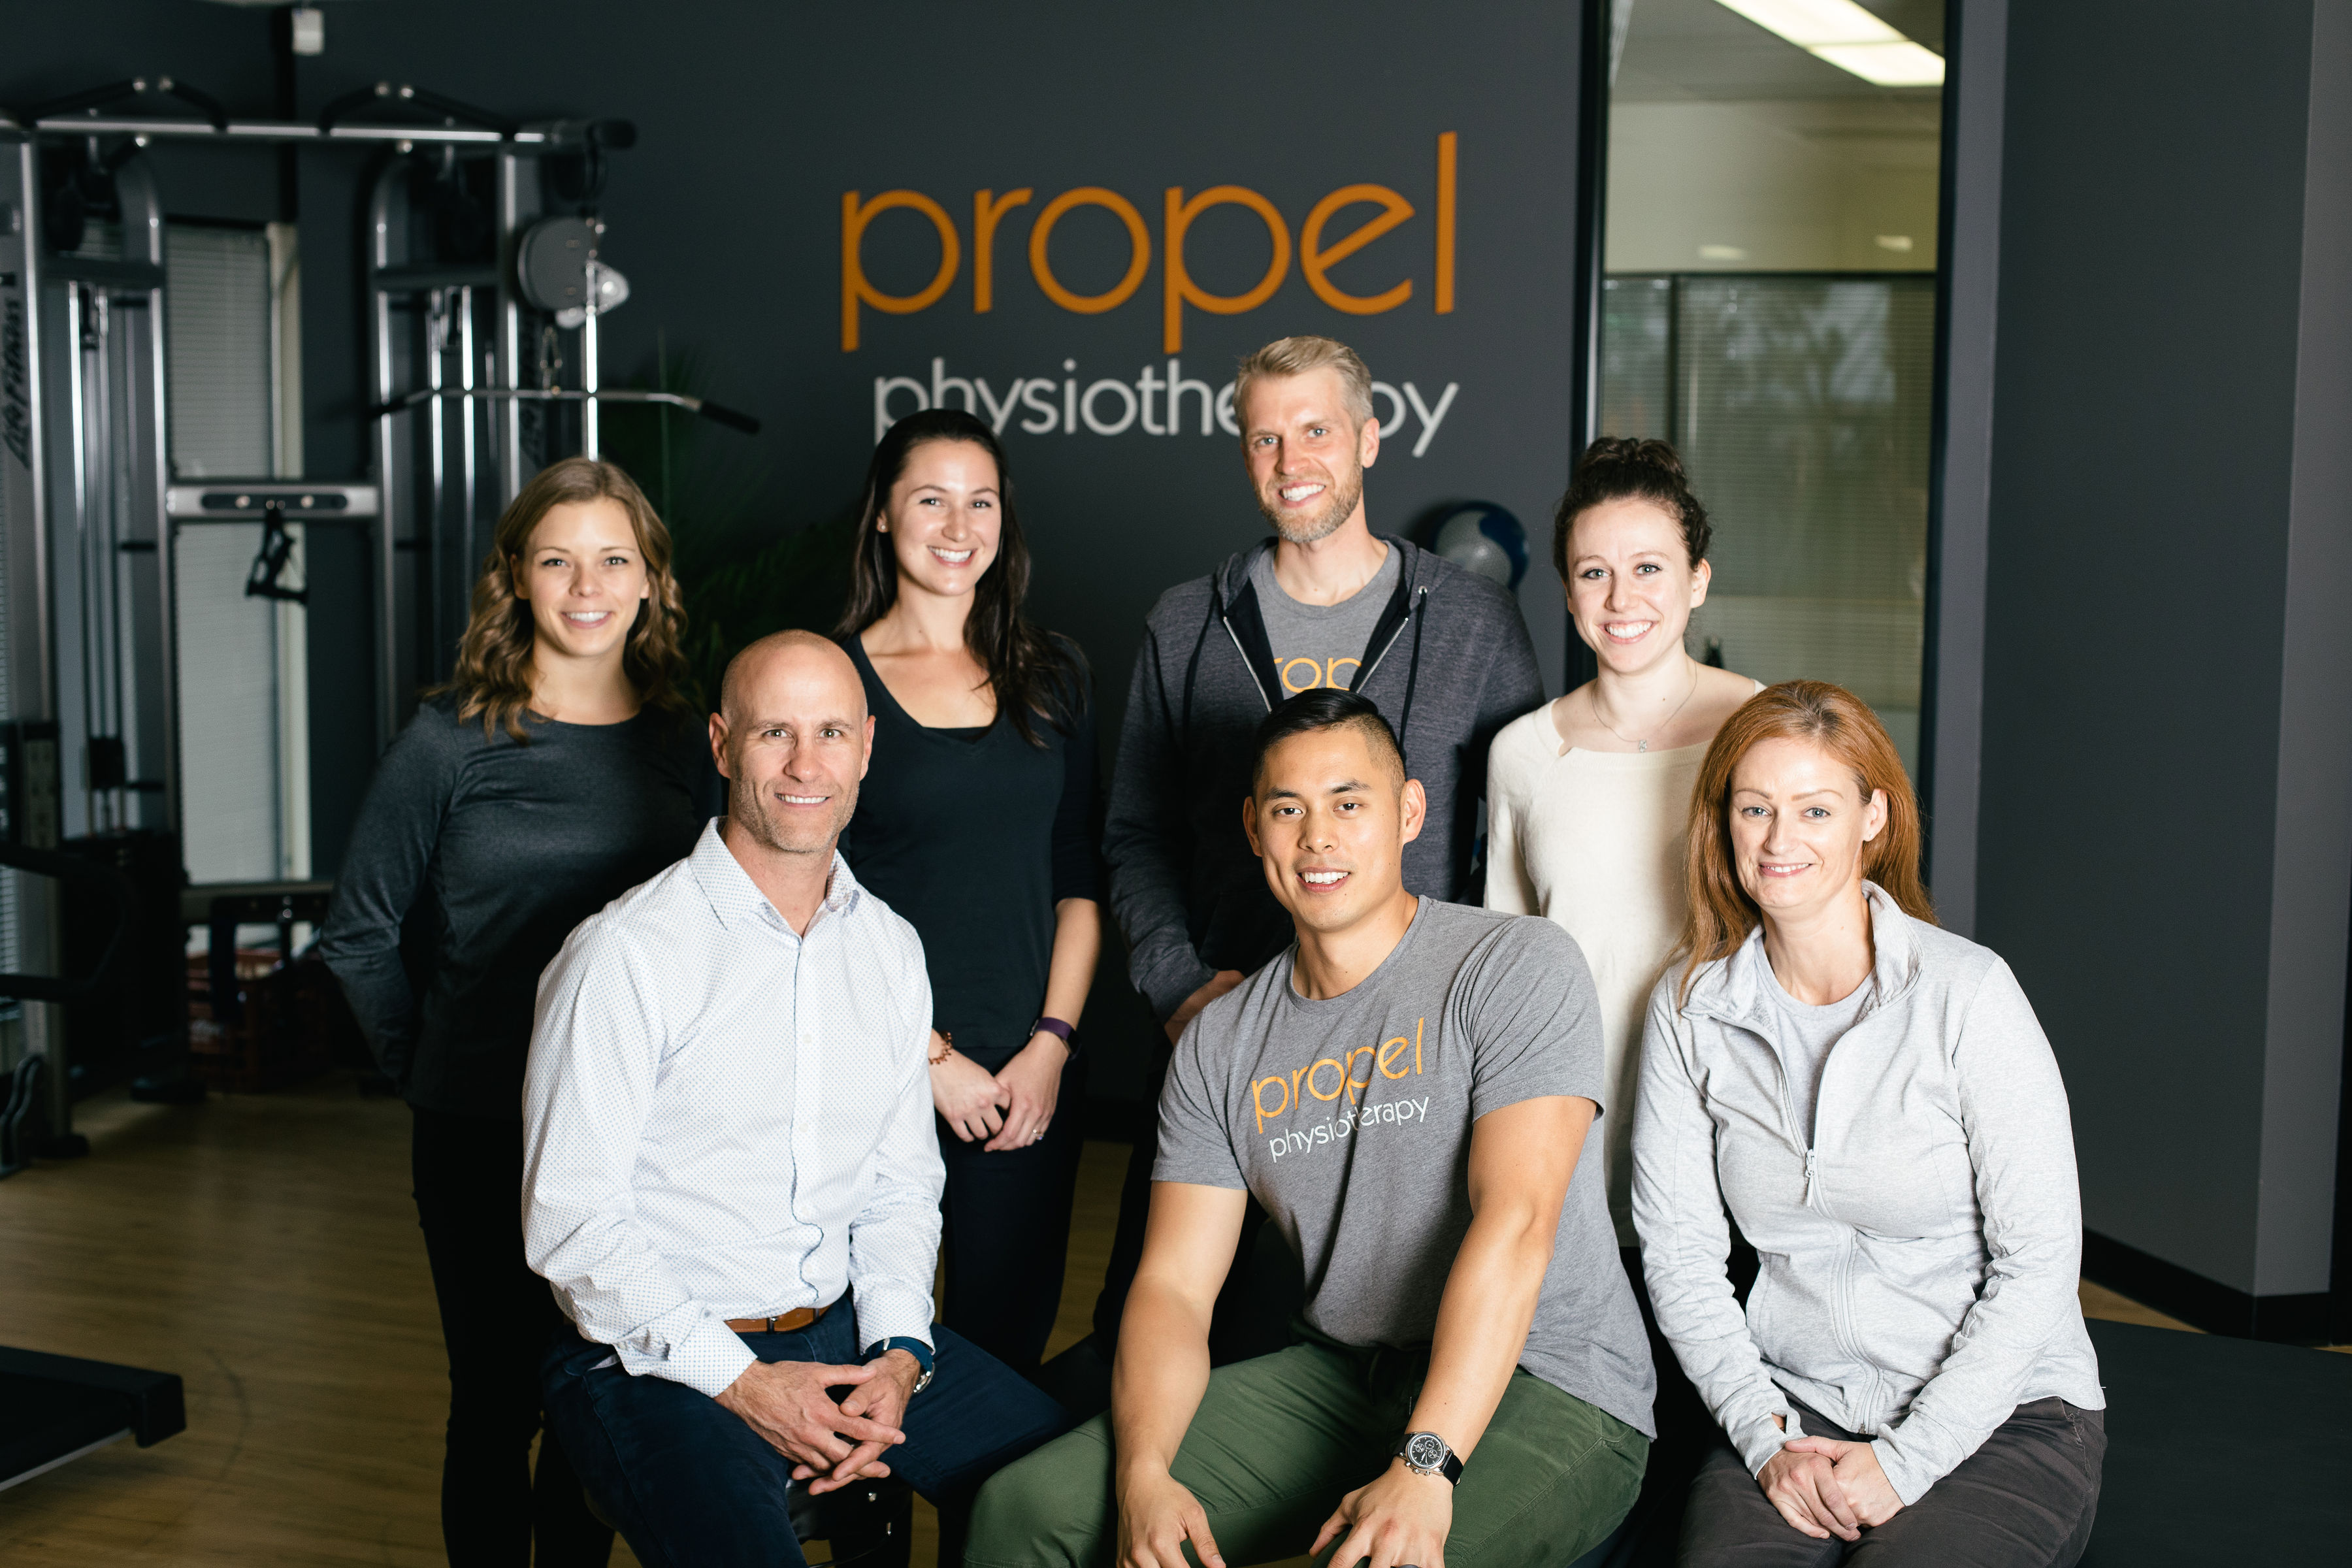 About Propel Physiotherapy Toronto Team